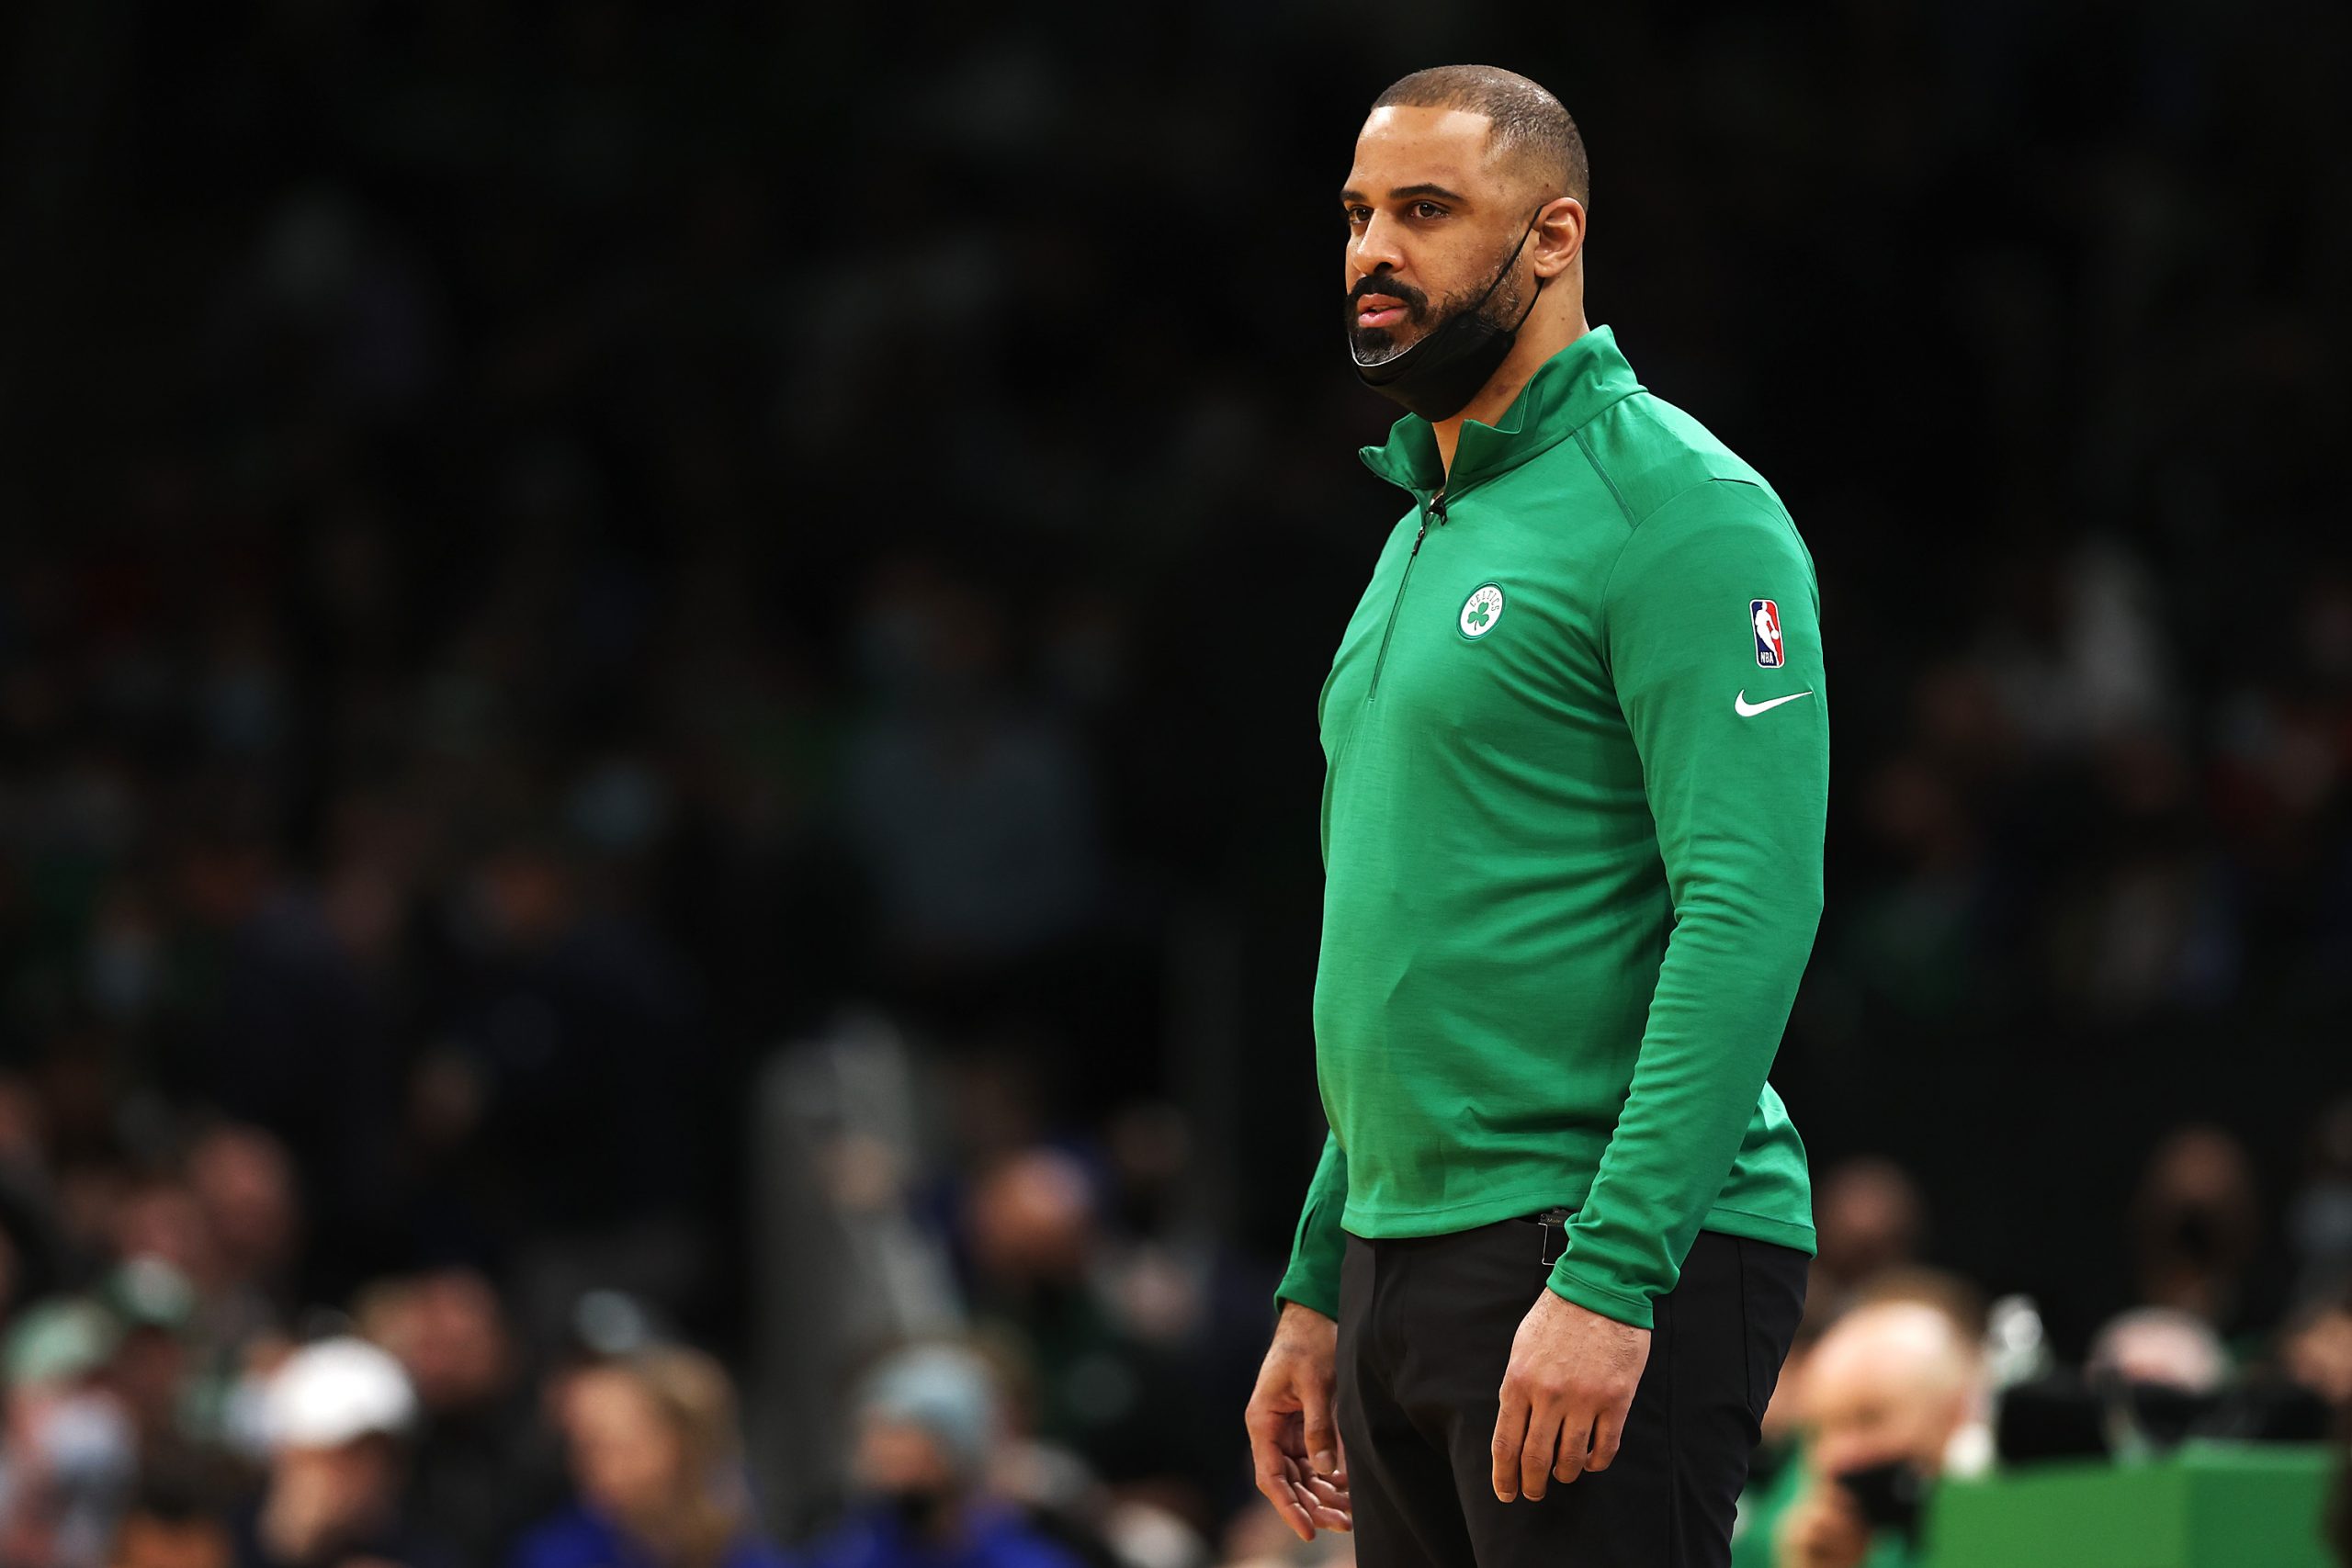 Head coach Ime Udoka of the Boston Celtics looks on during the first quarter of the game against the Memphis Grizzlies.